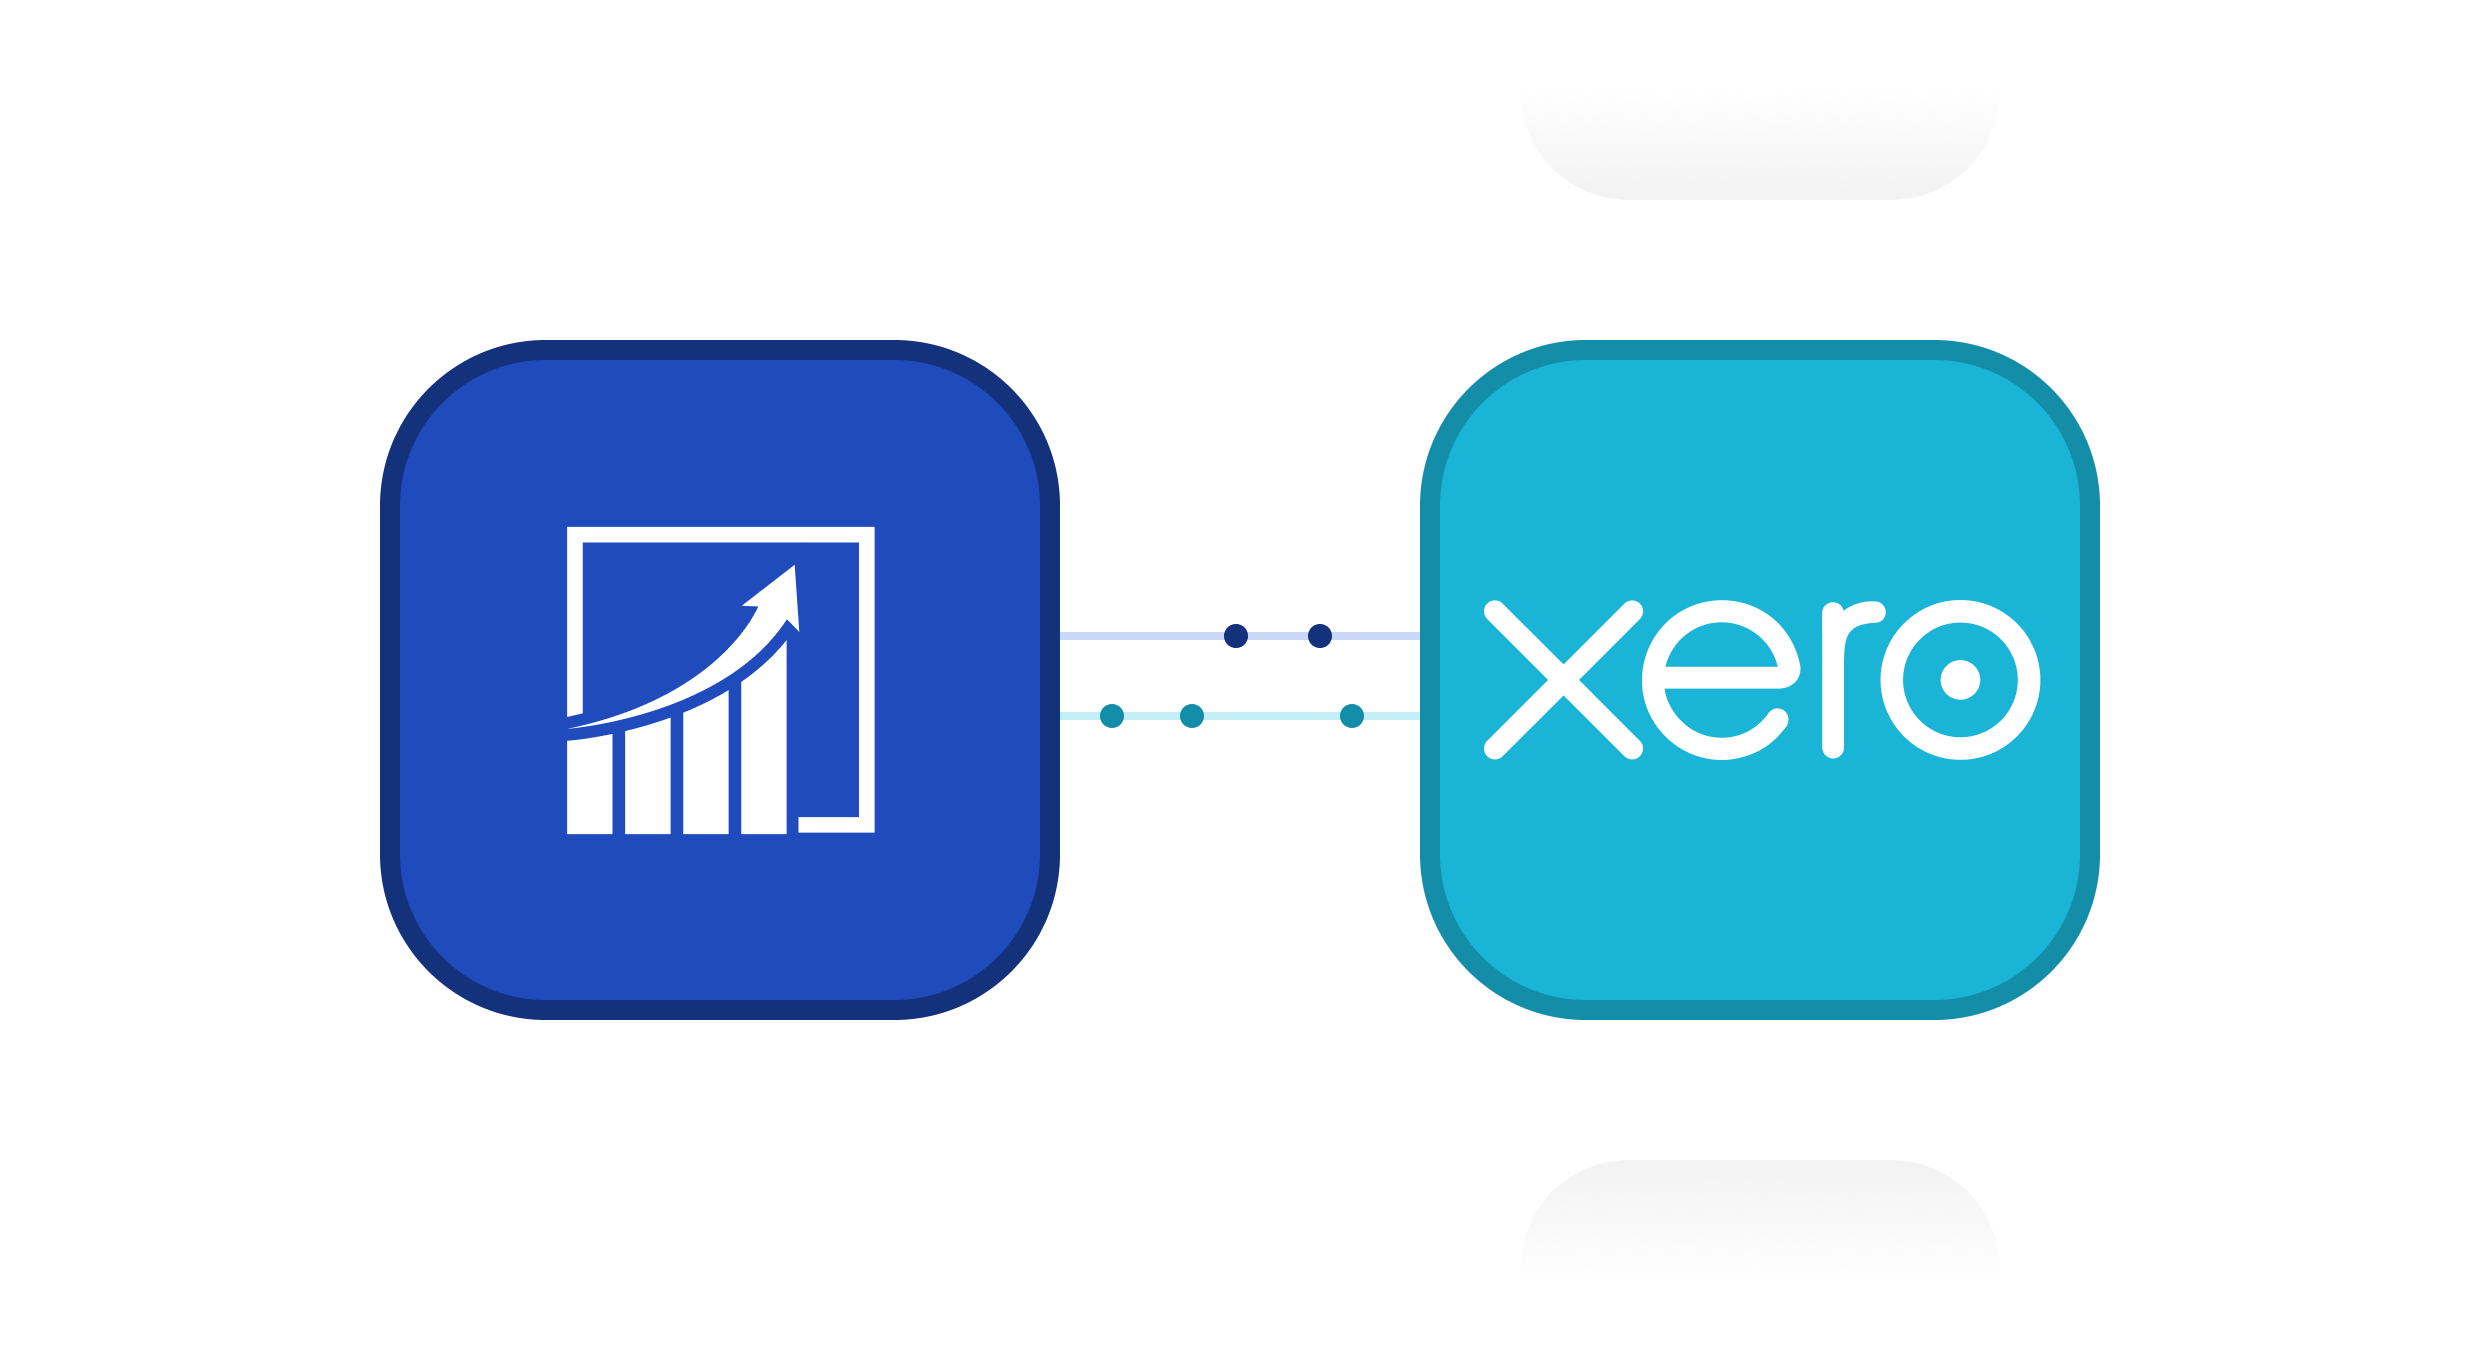 Stamped Integrates with XERO